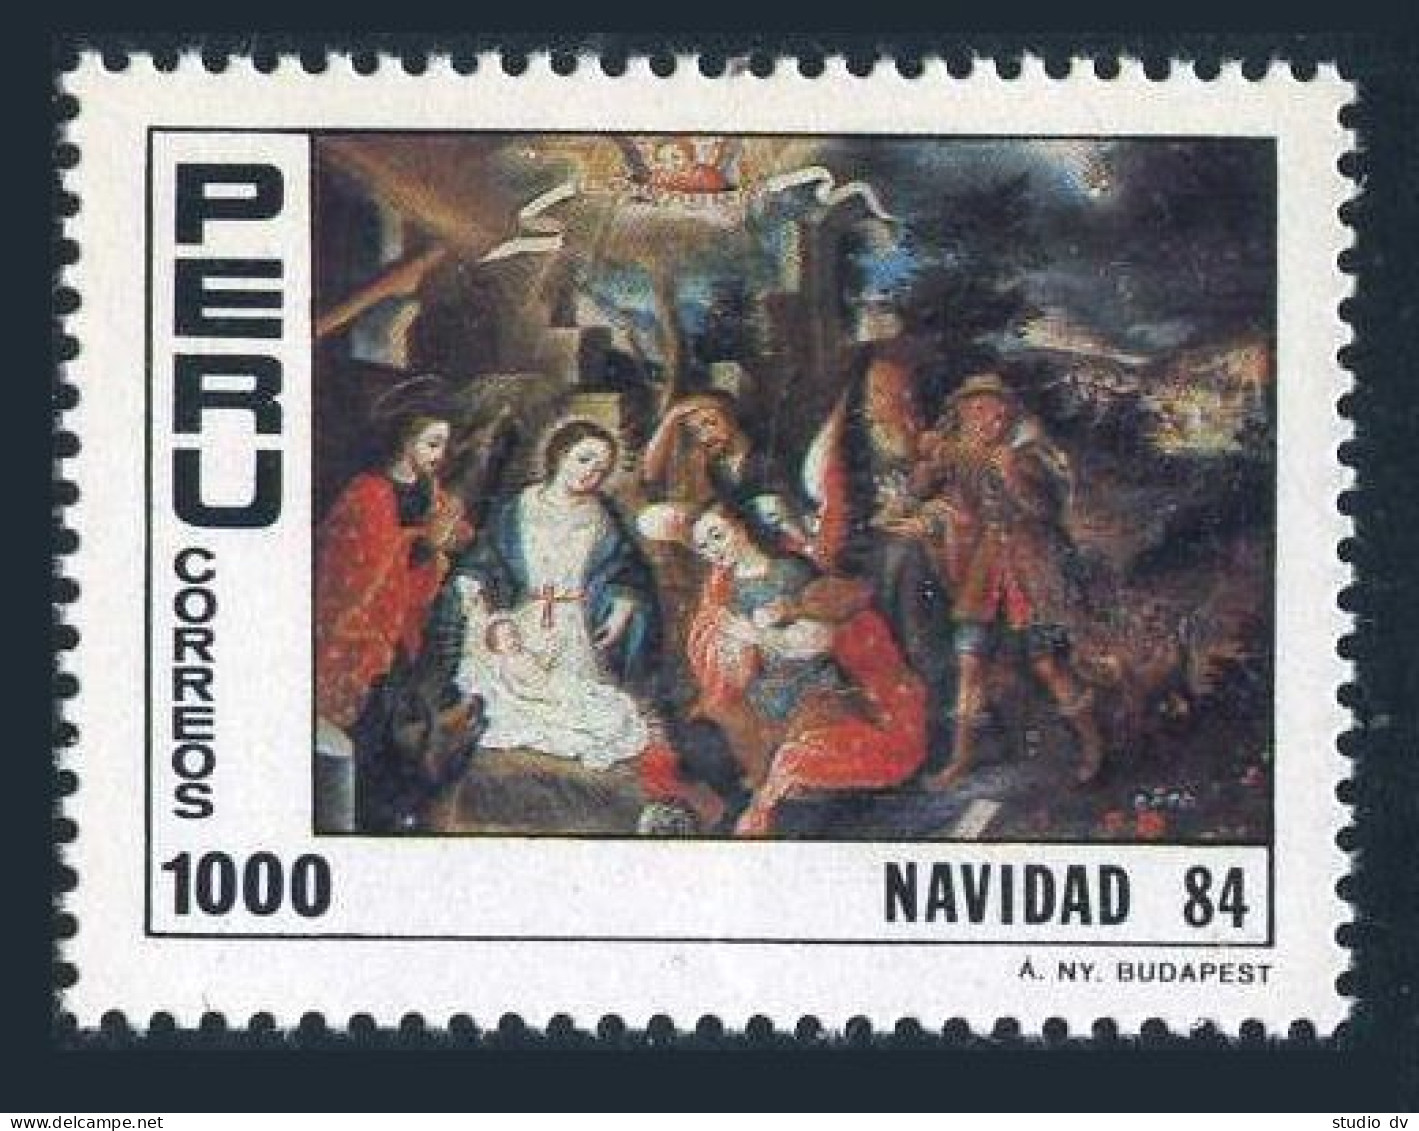 Peru 827, MNH. Michel 1287. Christmas 1984. Painting By Master From Cuzco. - Peru